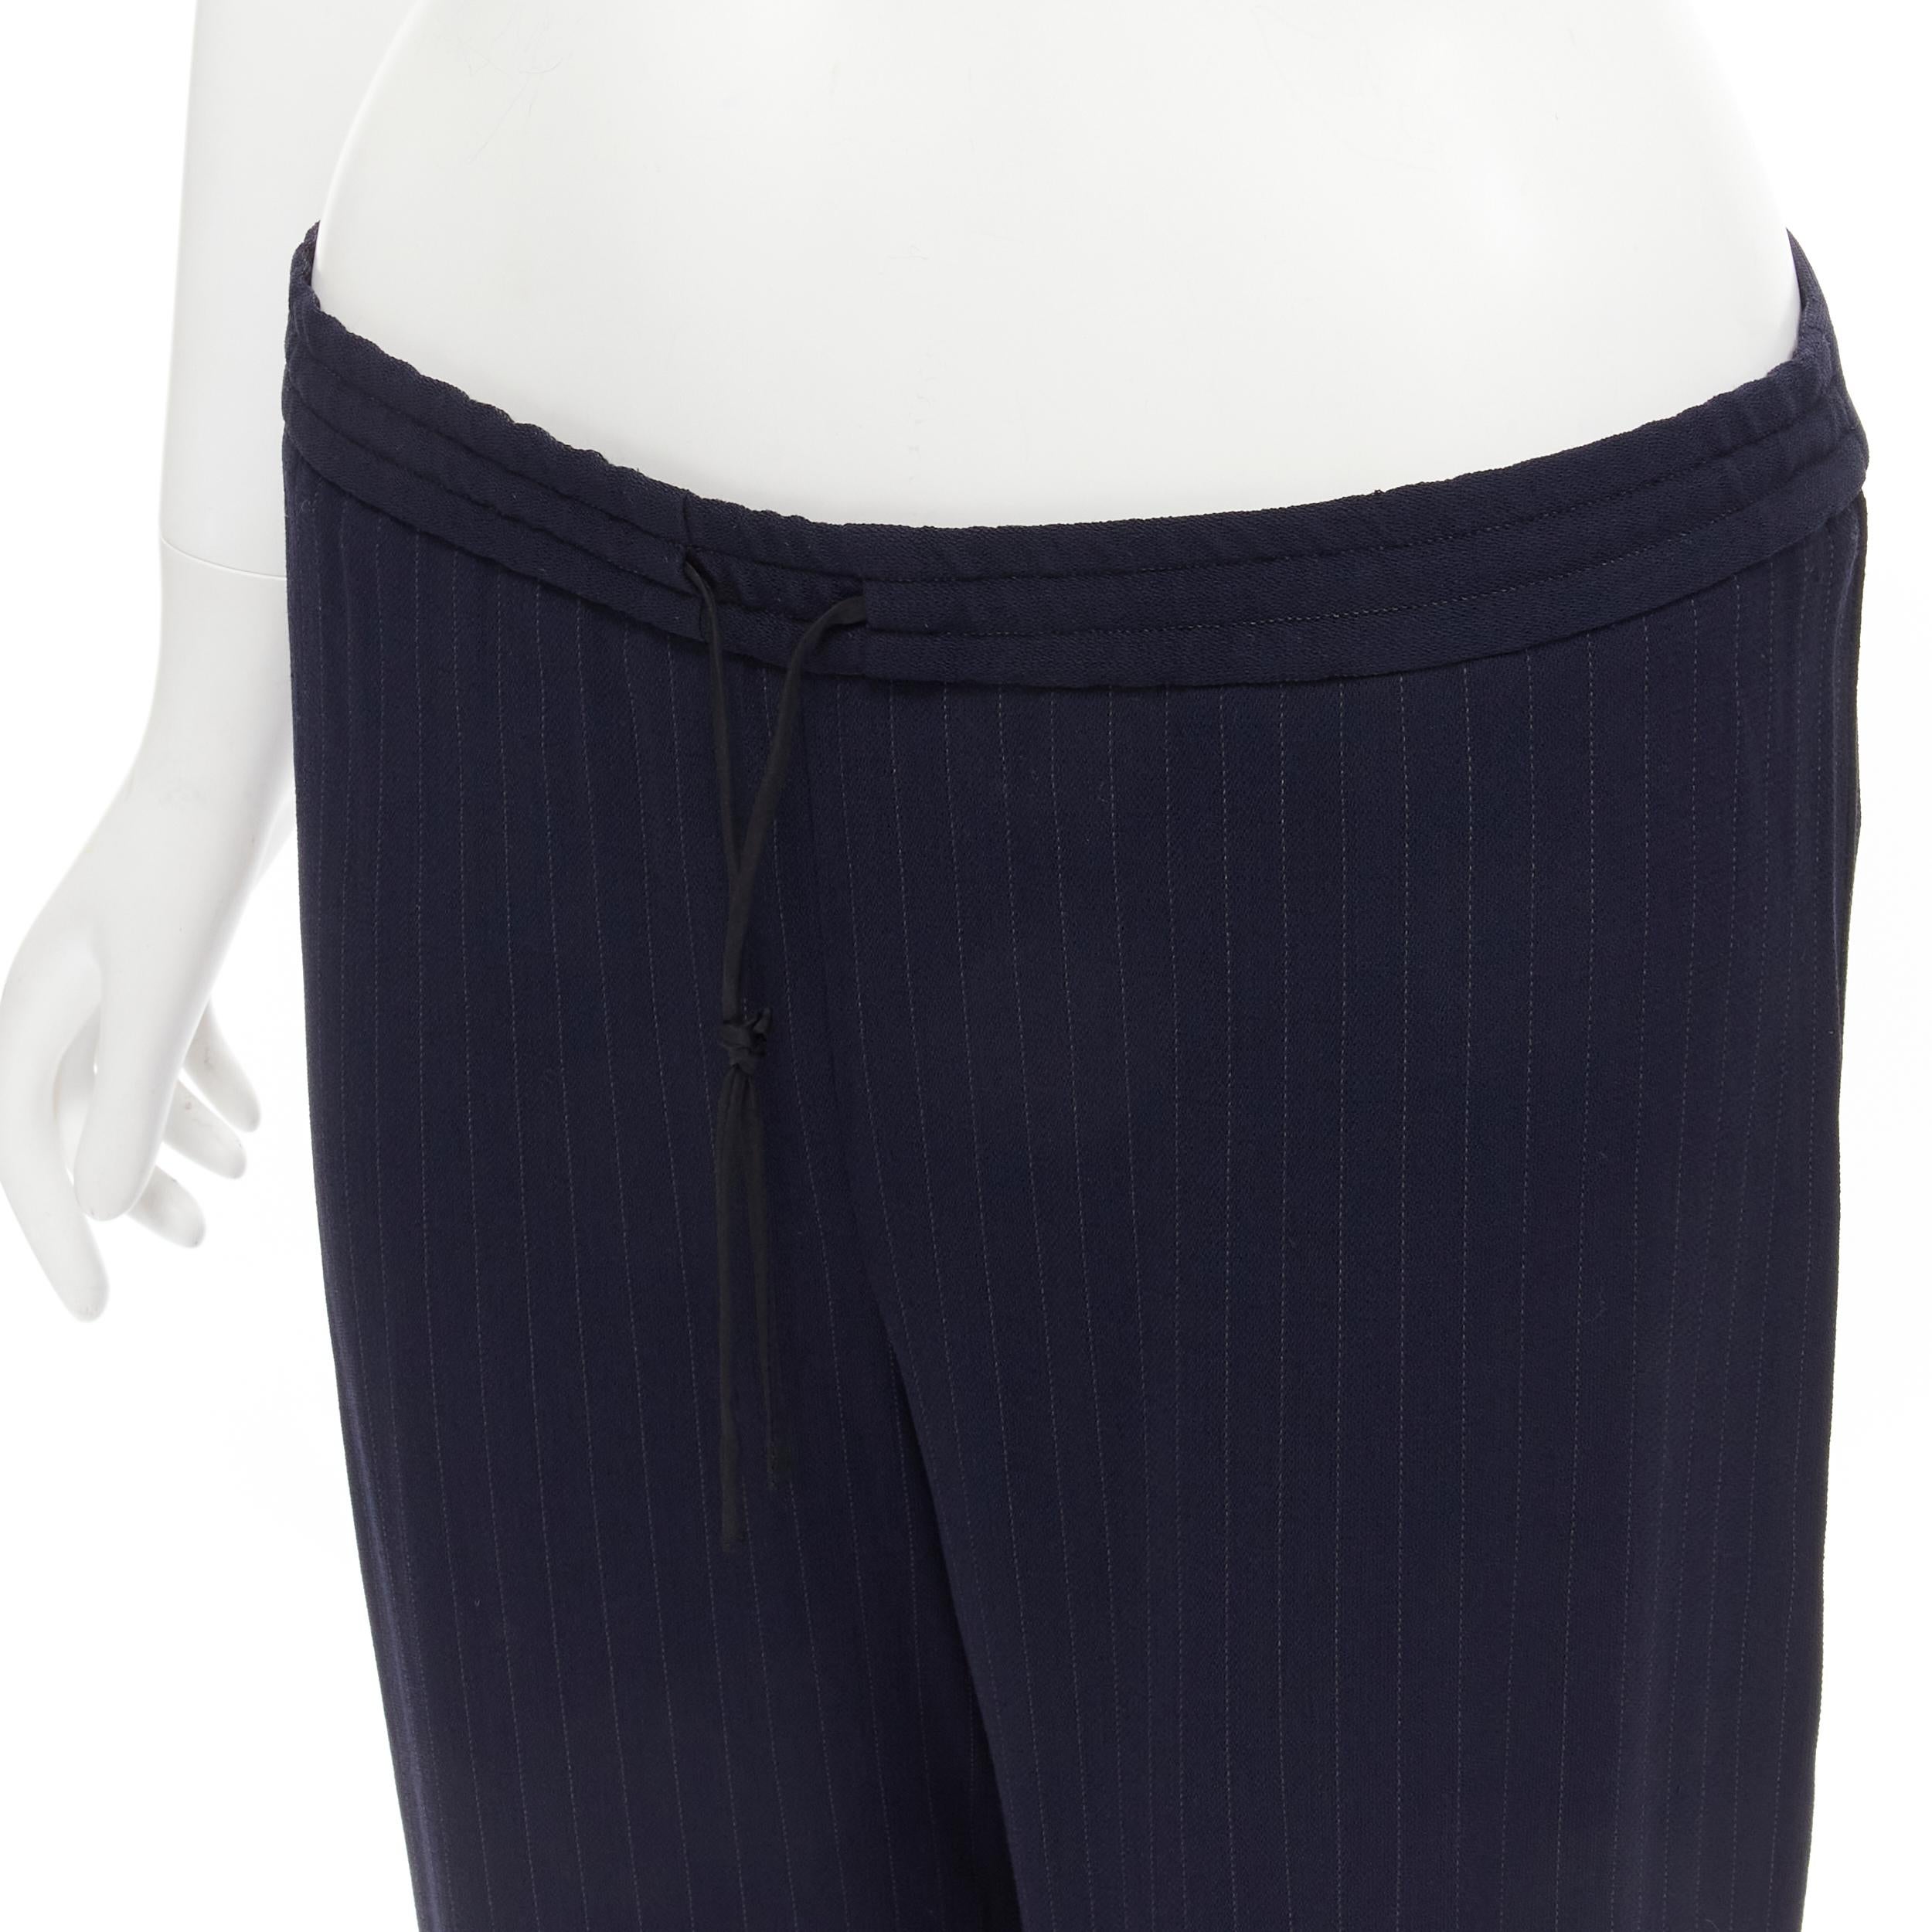 THE ROW navy blue pinstripe flowy relaxed trousers pants US0 XS
Brand: The Row
Designer: Mary Kate and Ashley Olsen
Color: Navy
Pattern: Striped
Extra Detail: Single back pocket.
Made in: United States

CONDITION:
Condition: Excellent, this item was